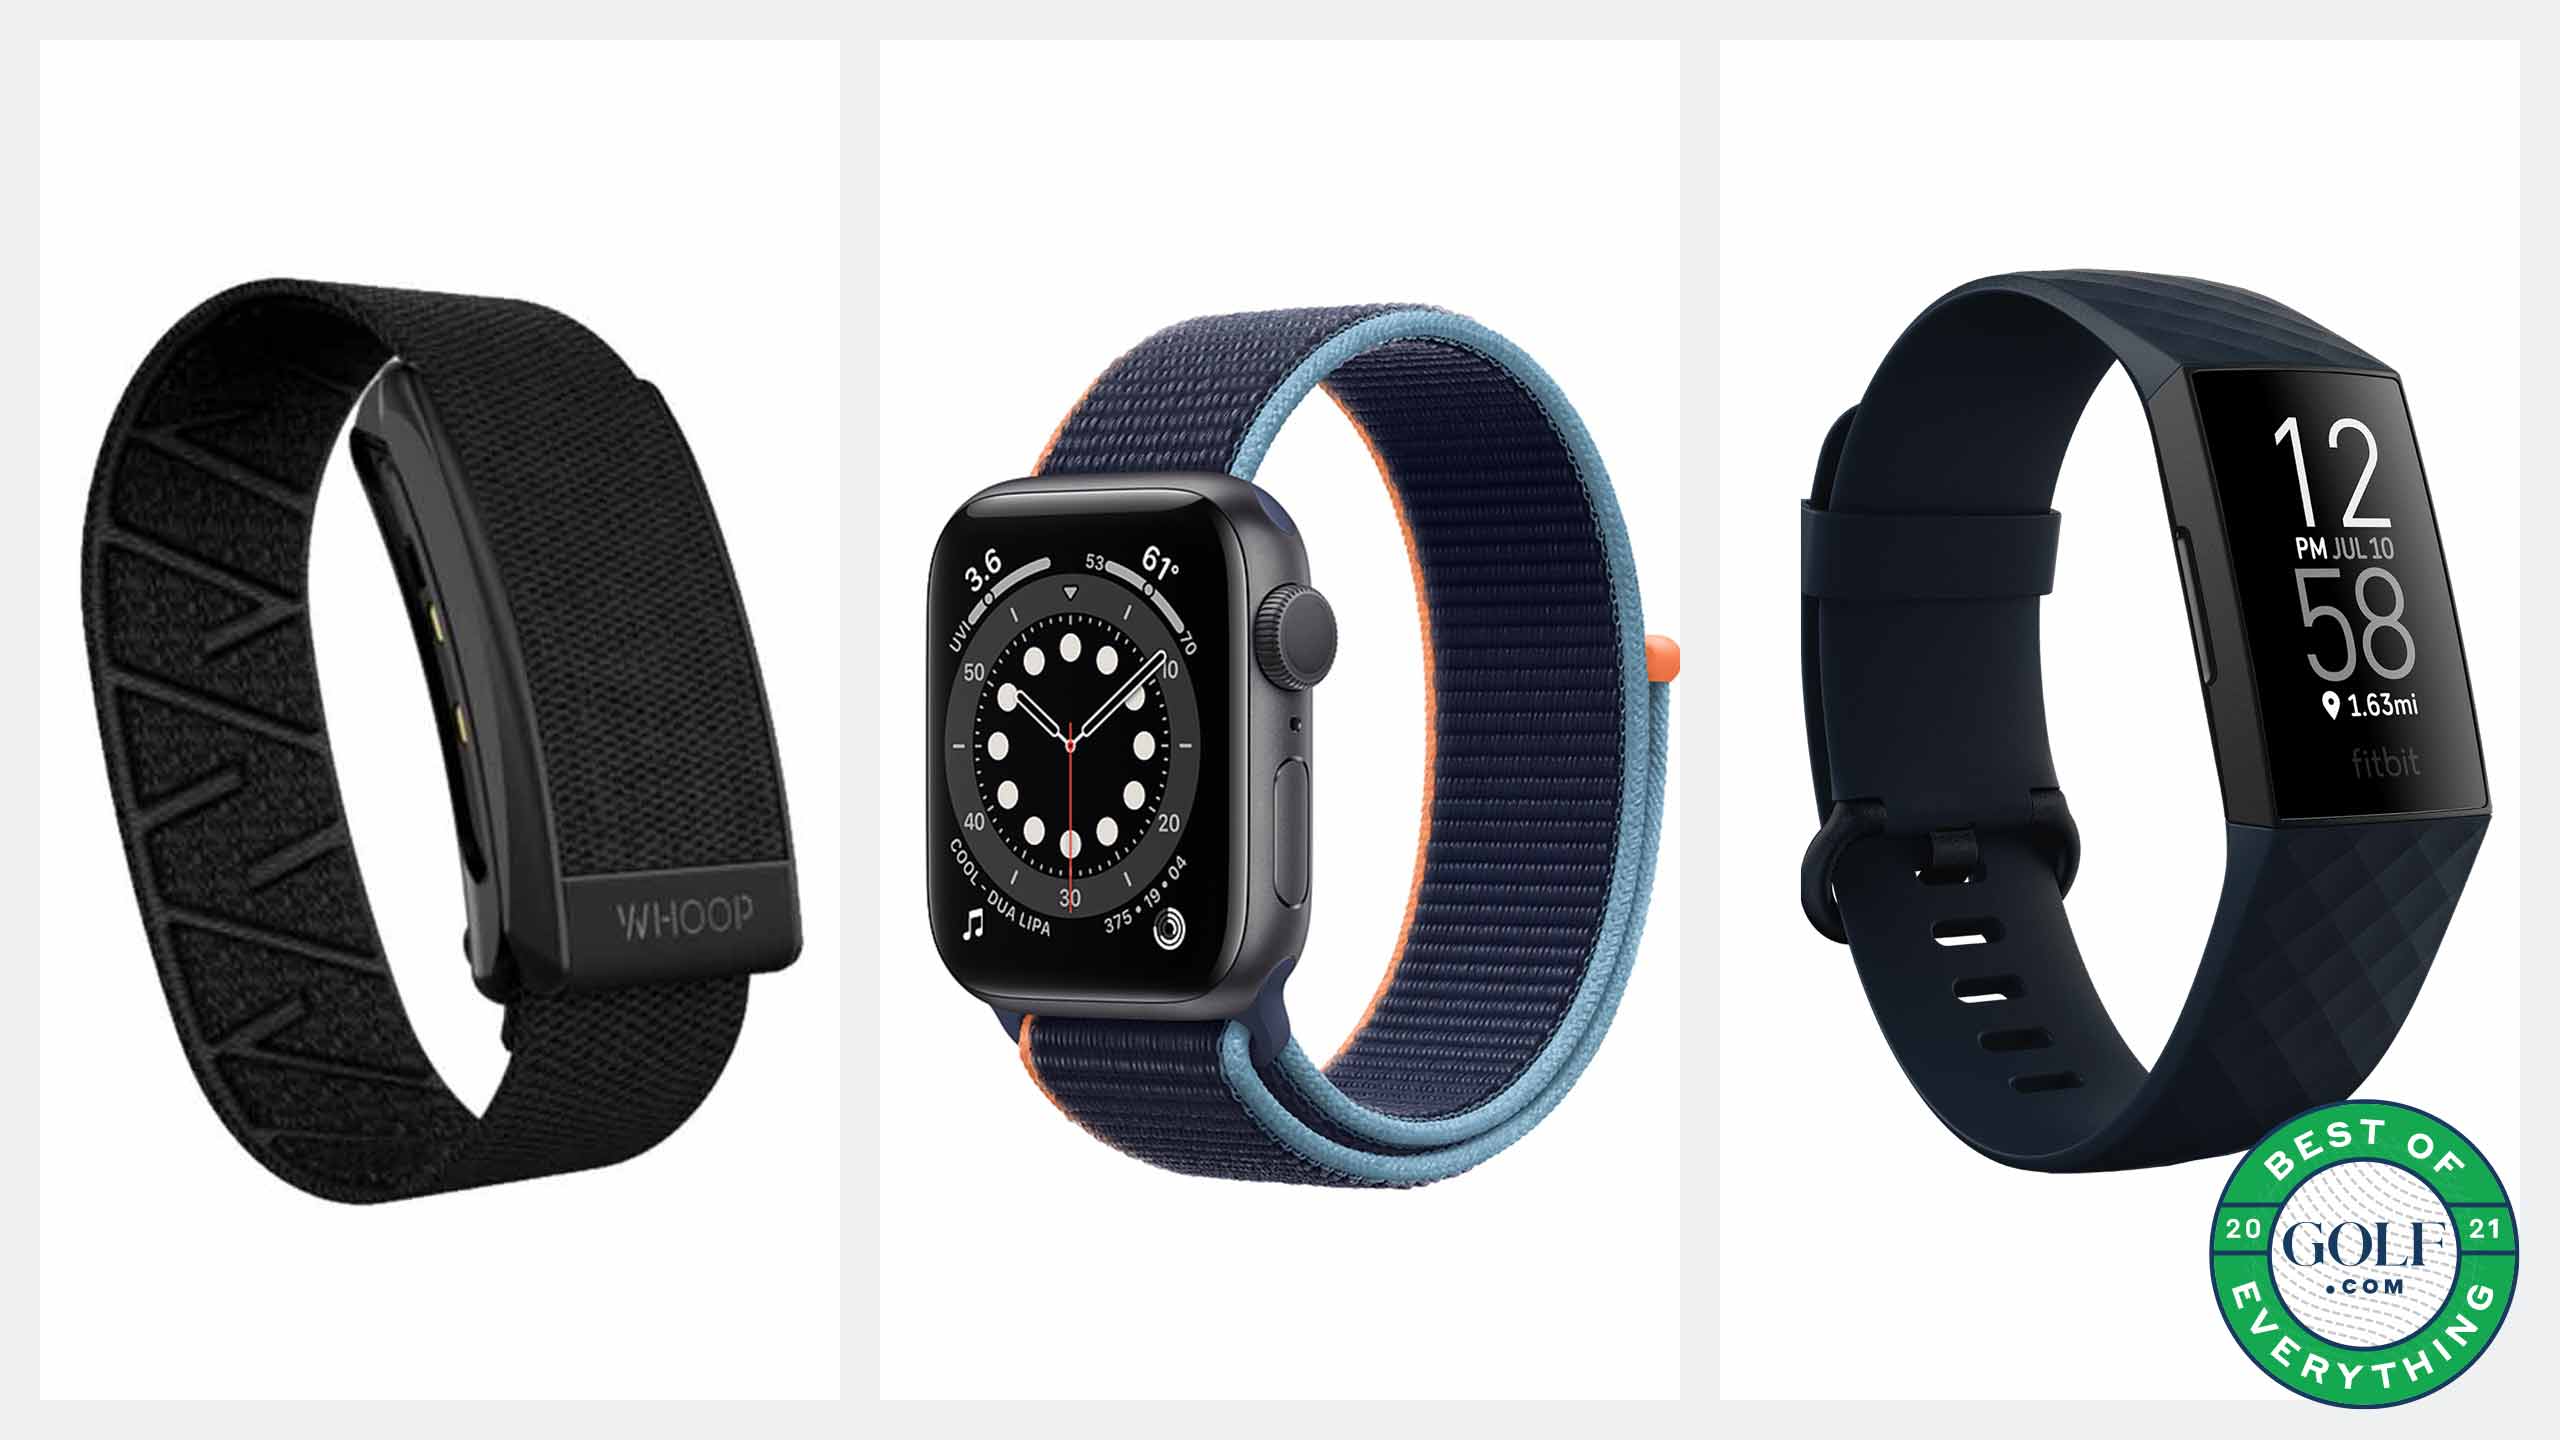 Best of: 5 fitness trackers to help you 